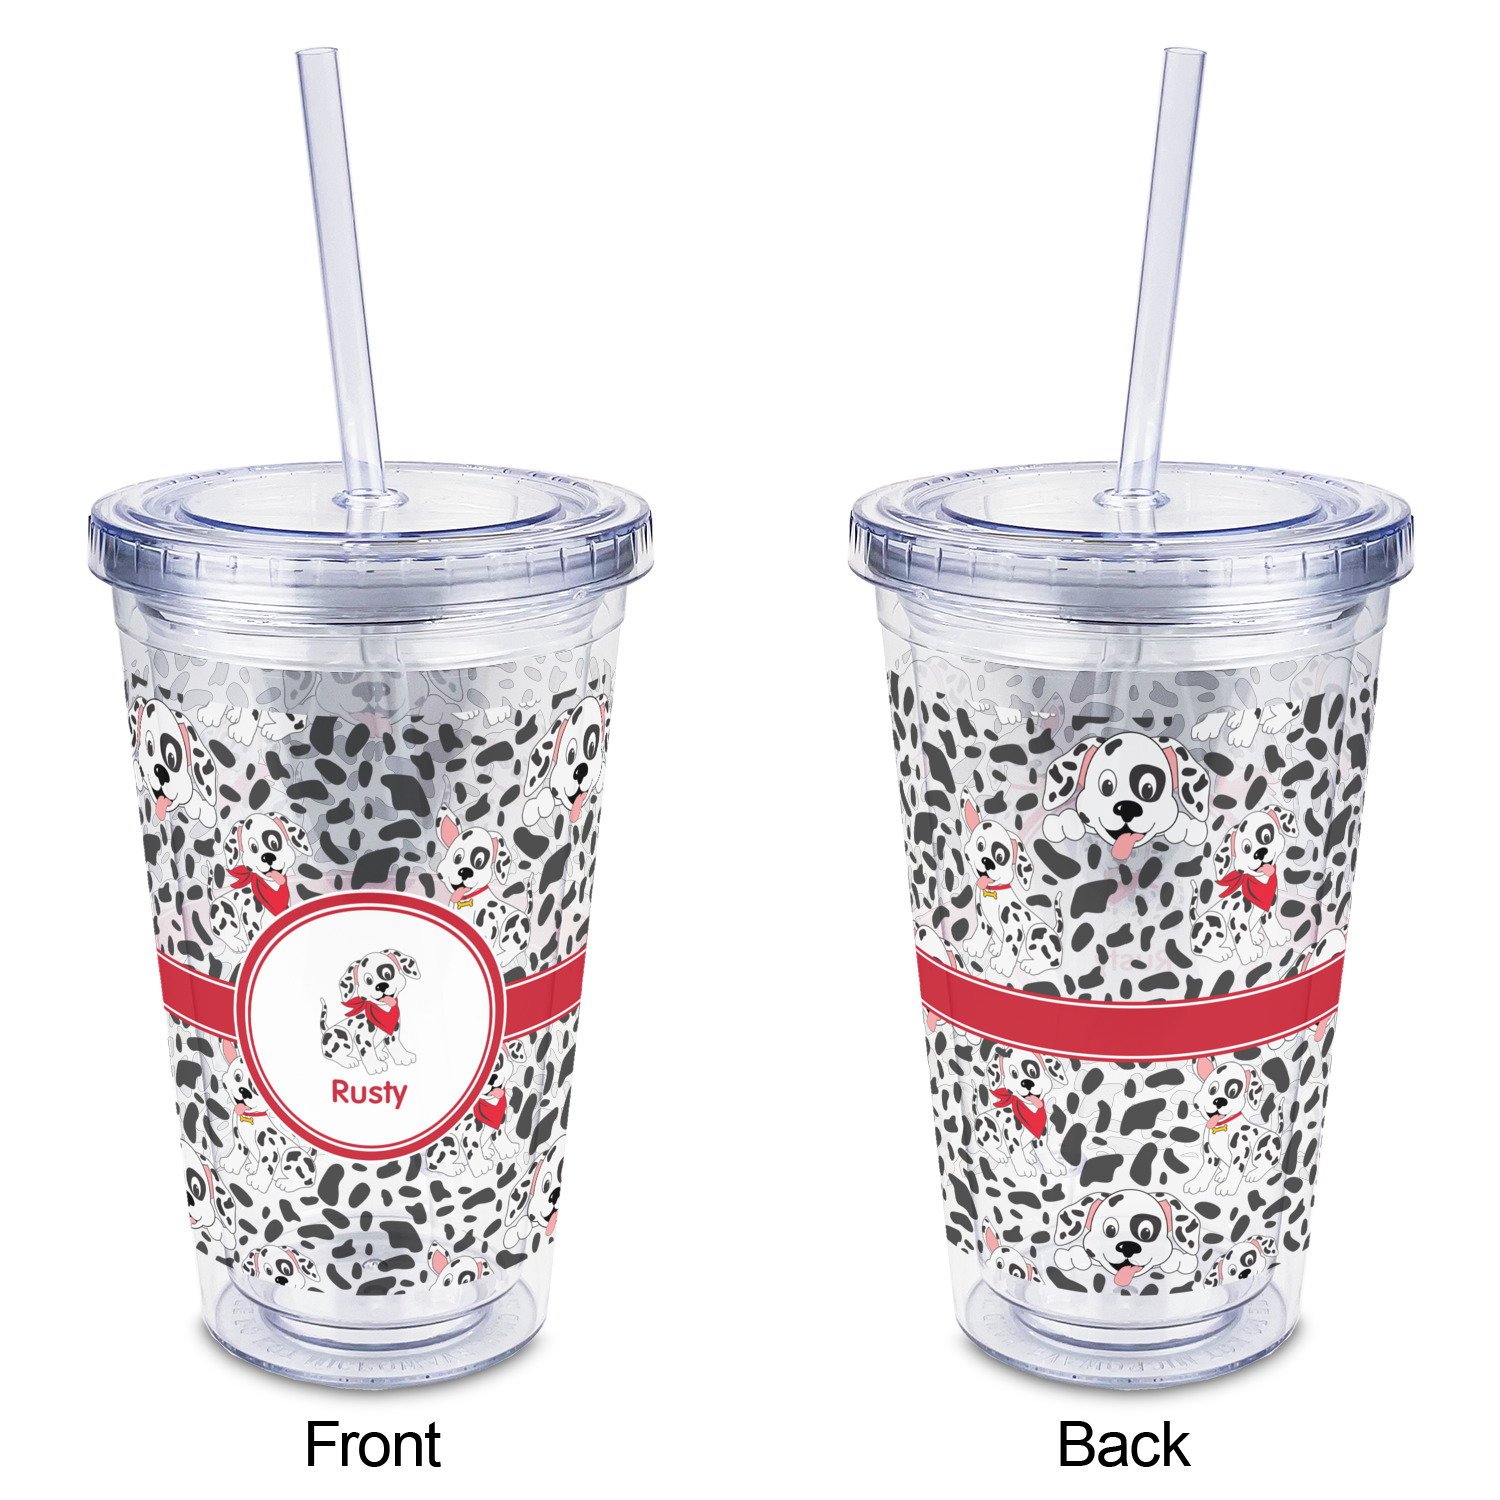 Custom 16 oz Double Wall Acrylic Tumblers with Lid & Straw - Full Print, Design & Preview Online